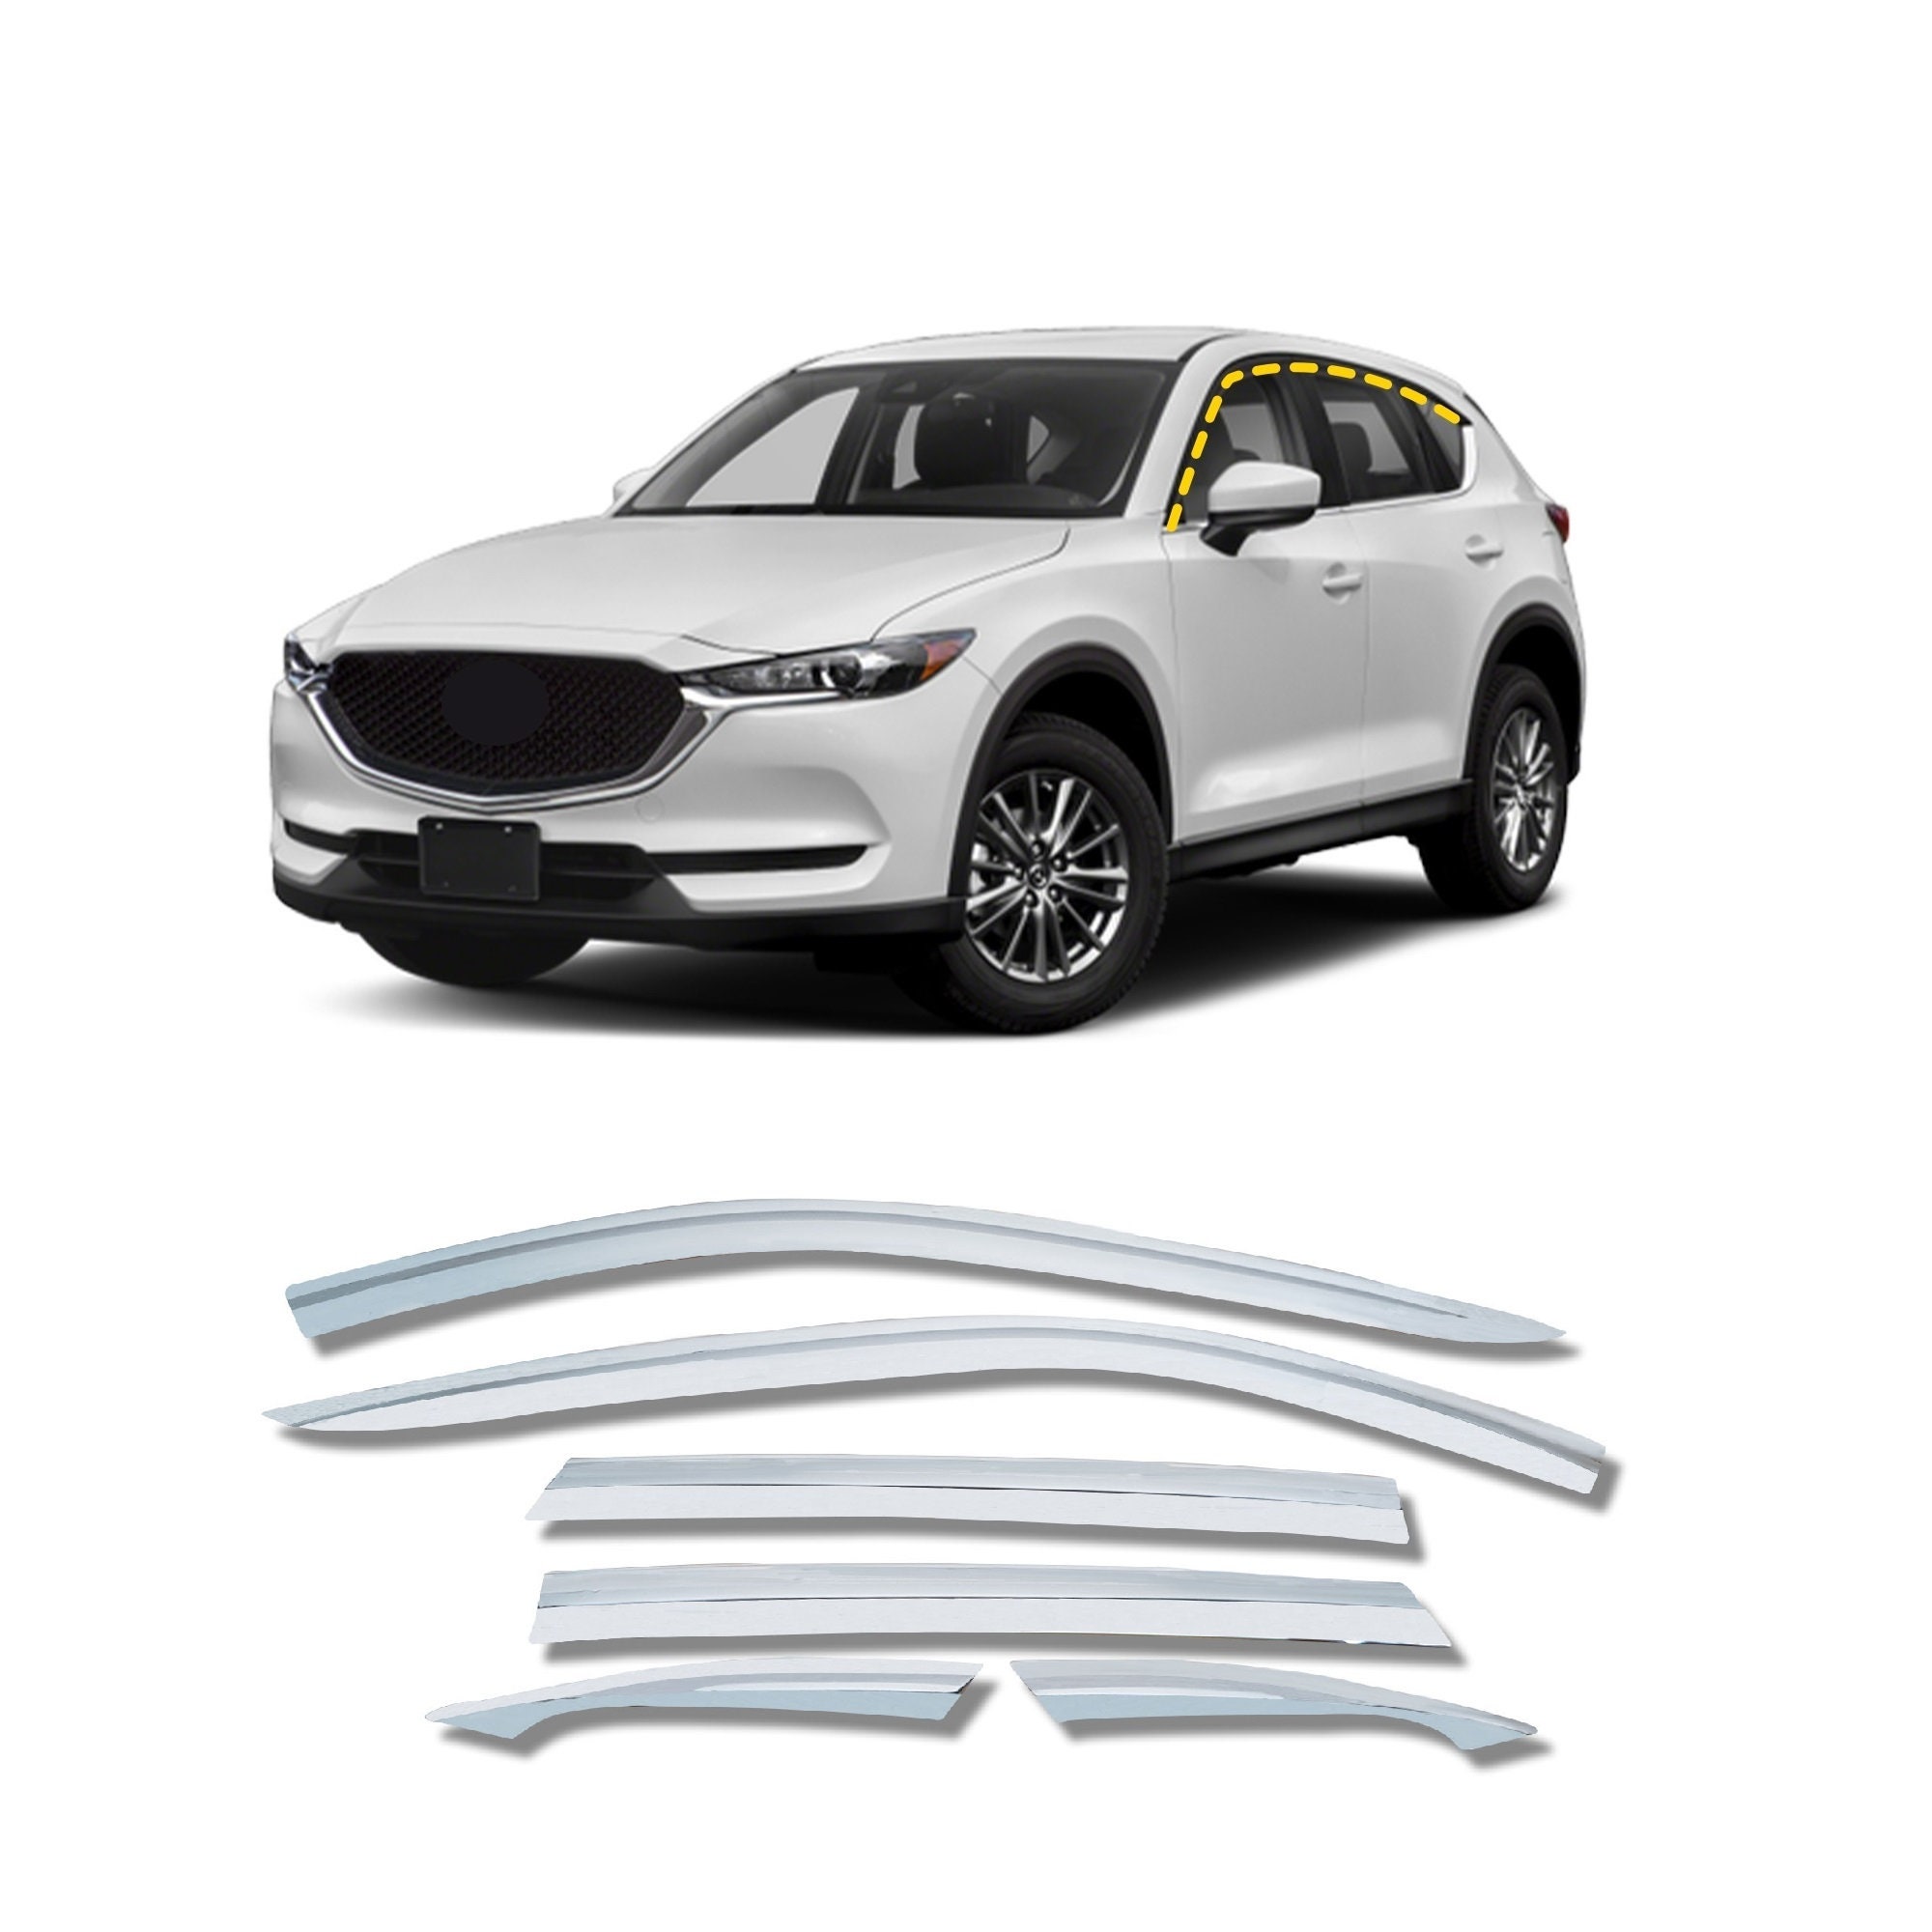 Goodyear Shatterproof in-Channel Window Deflectors for Mazda CX-5 2017-2024,  Rain Guards, Window Visors for Cars, Car Accessories, Vent Deflector, 4 pcs  - GY007703 